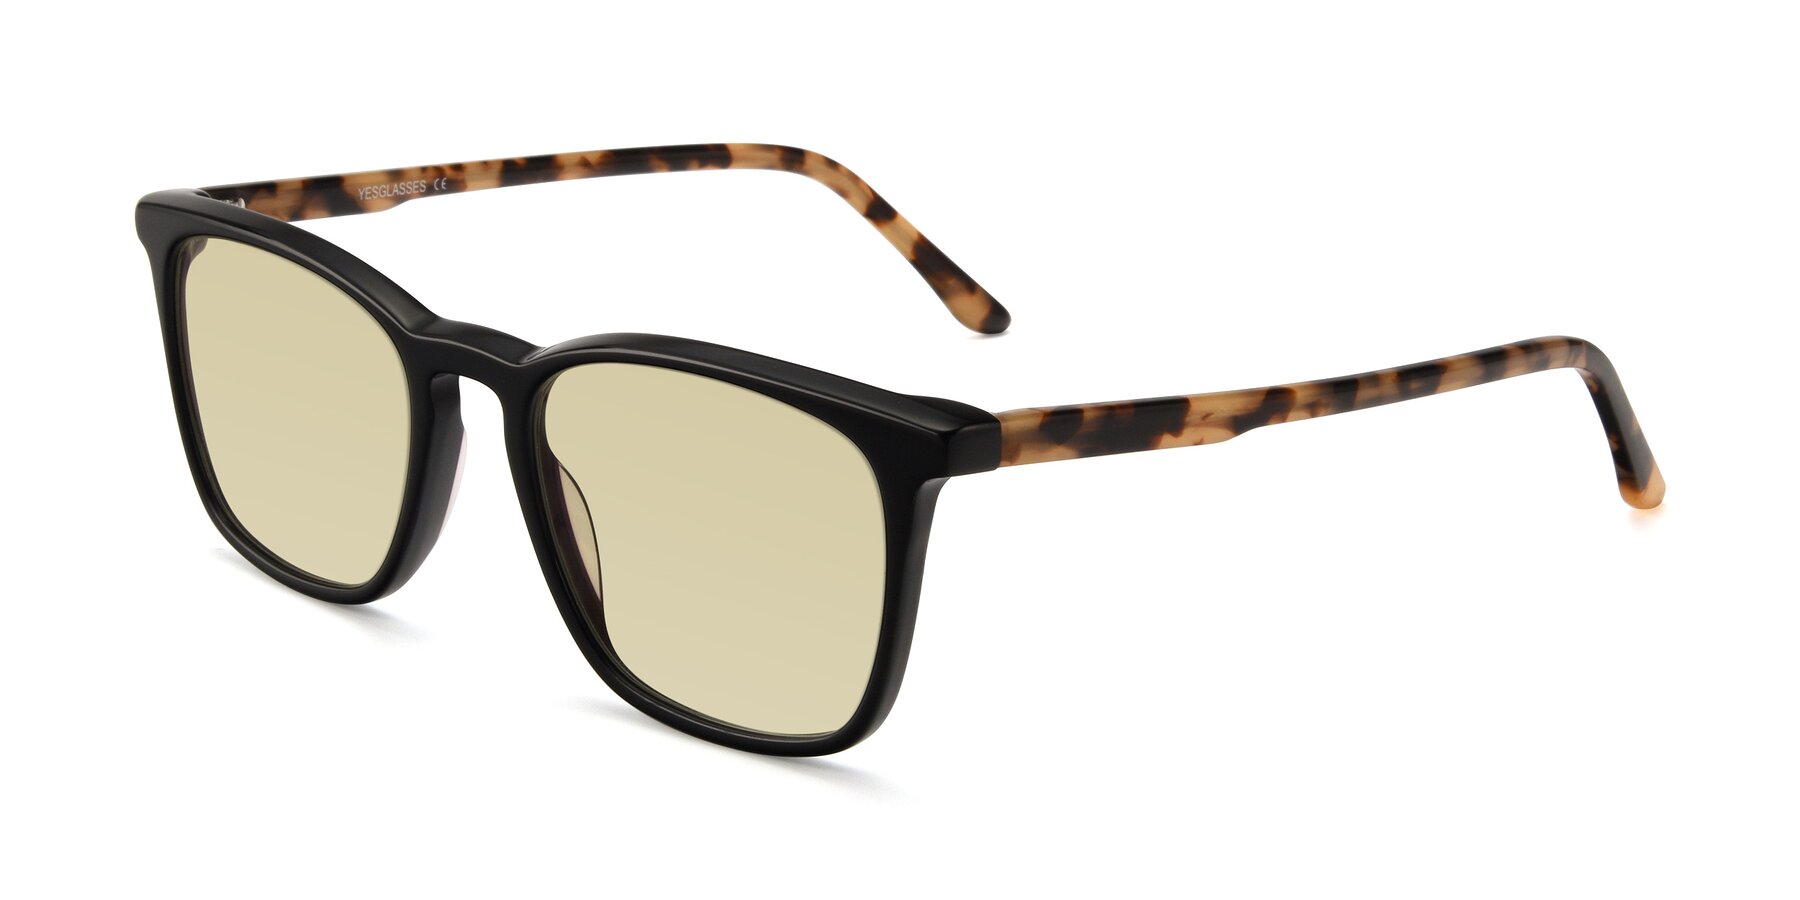 Angle of Vigor in Black-Tortoise with Light Champagne Tinted Lenses